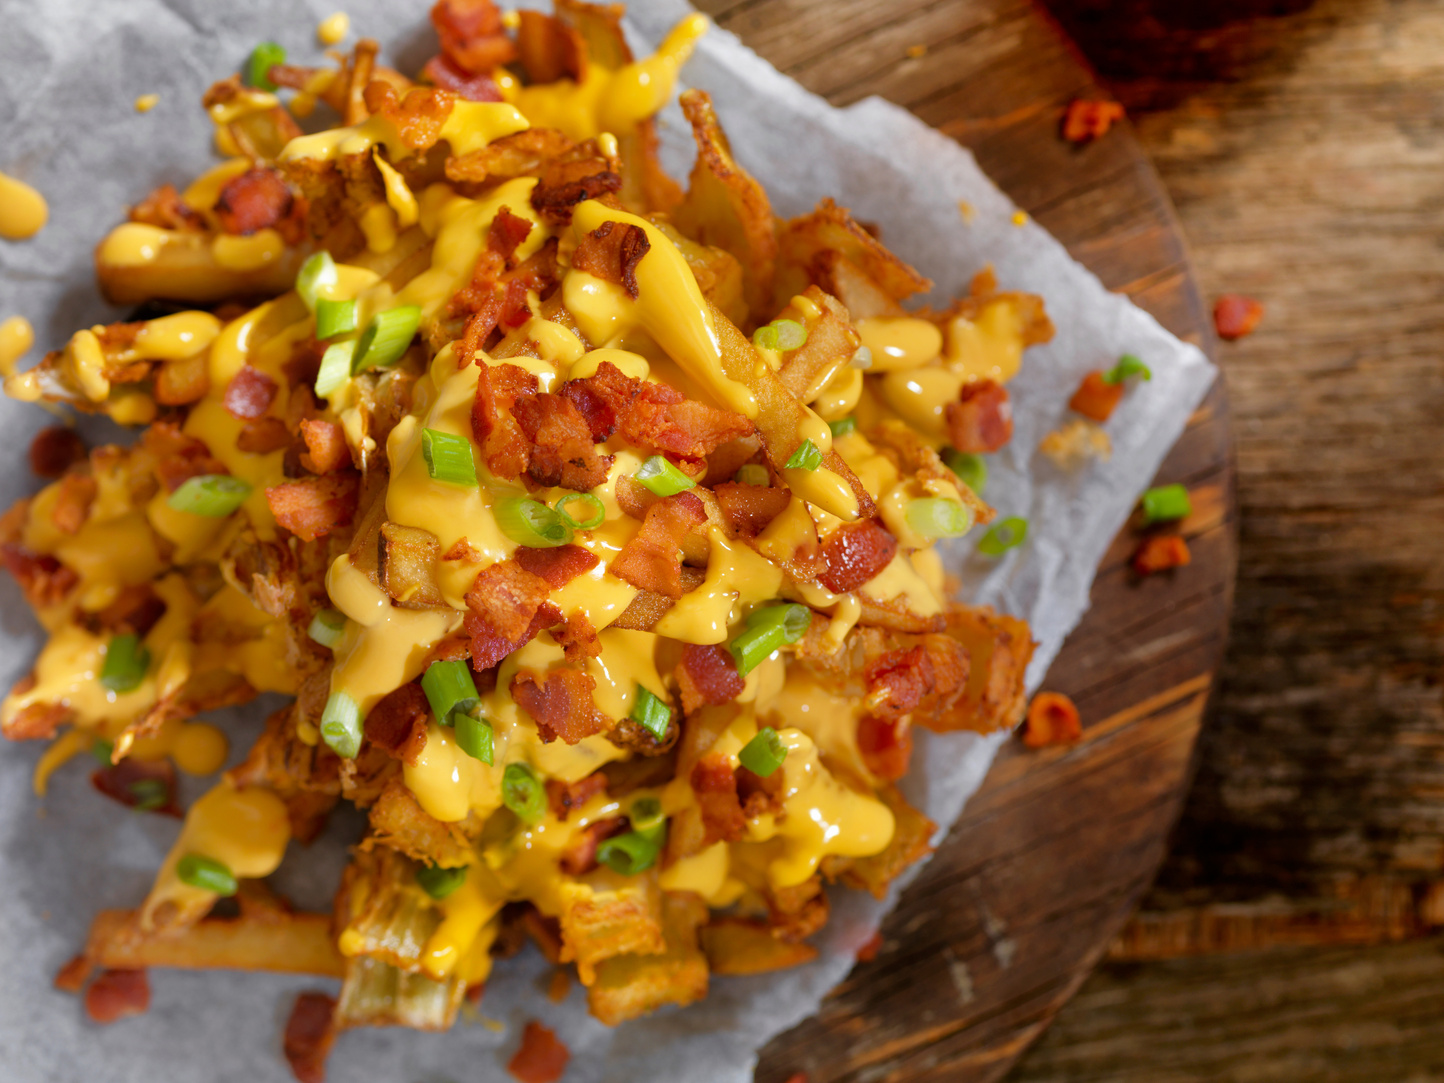 Loaded Blooming Onion with Fries, Cheese Sauce and Bacon